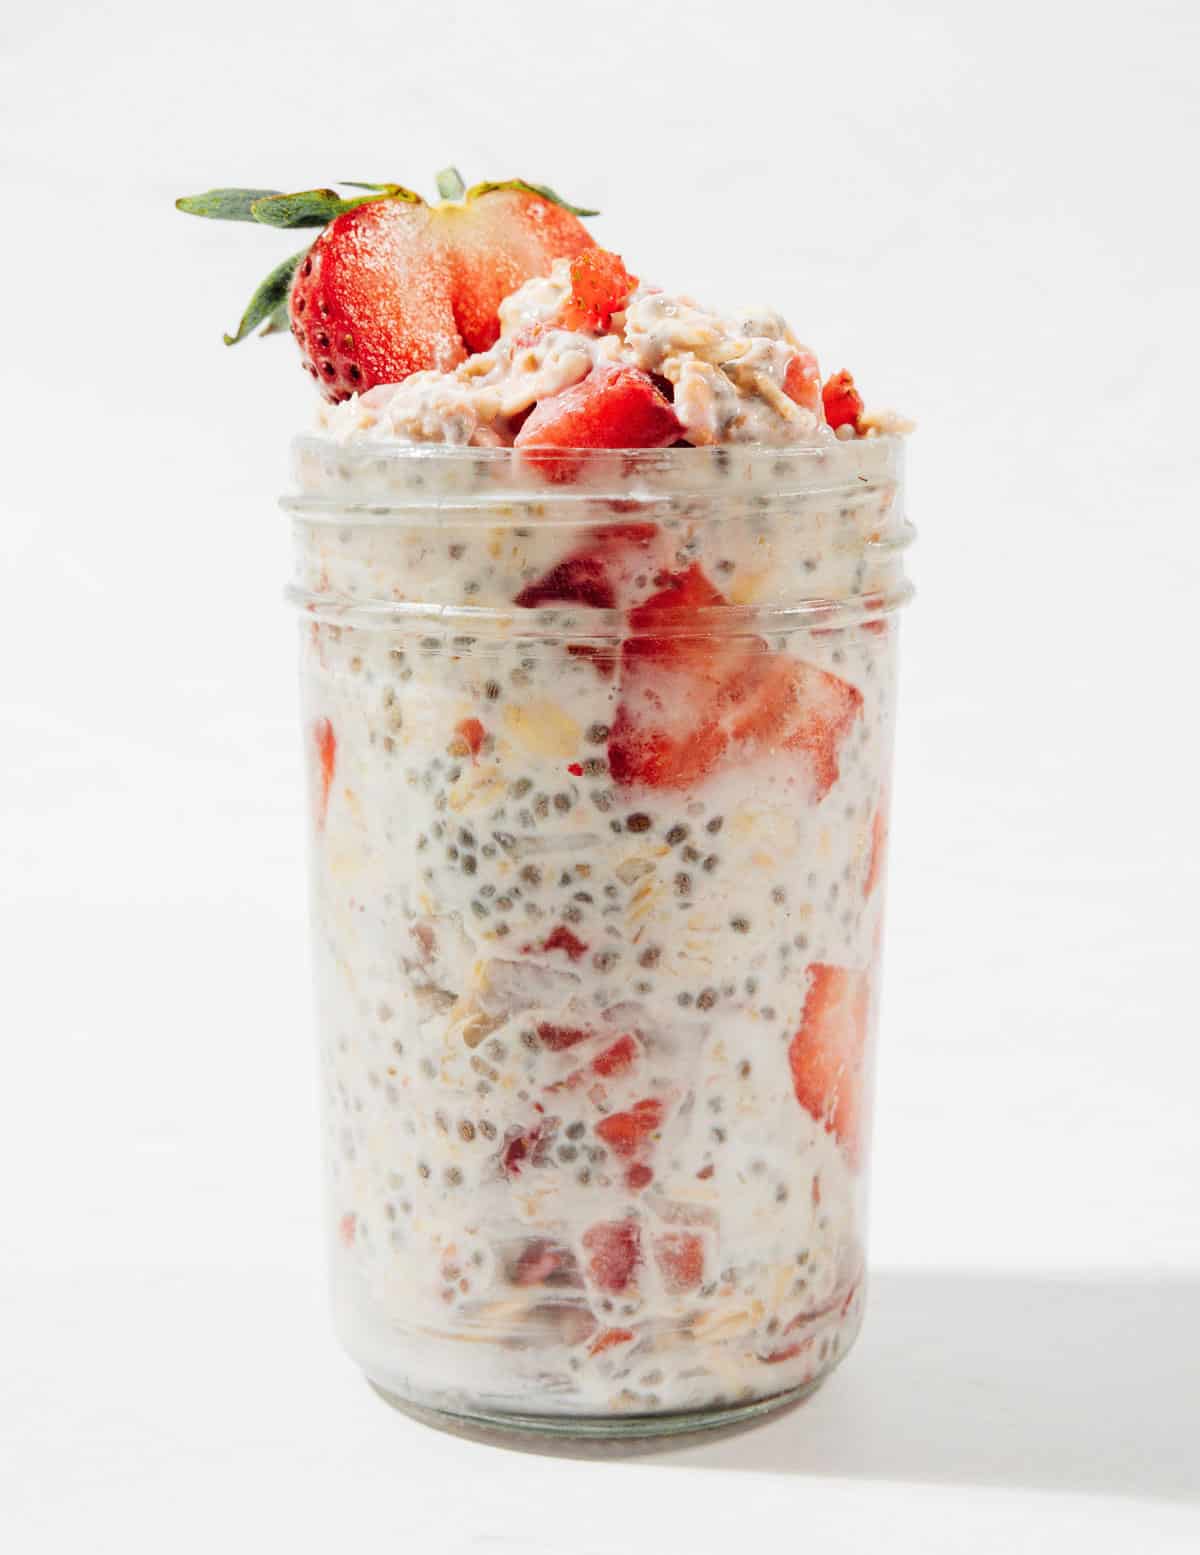 Ingredients for strawberry overnight oats in a jar.